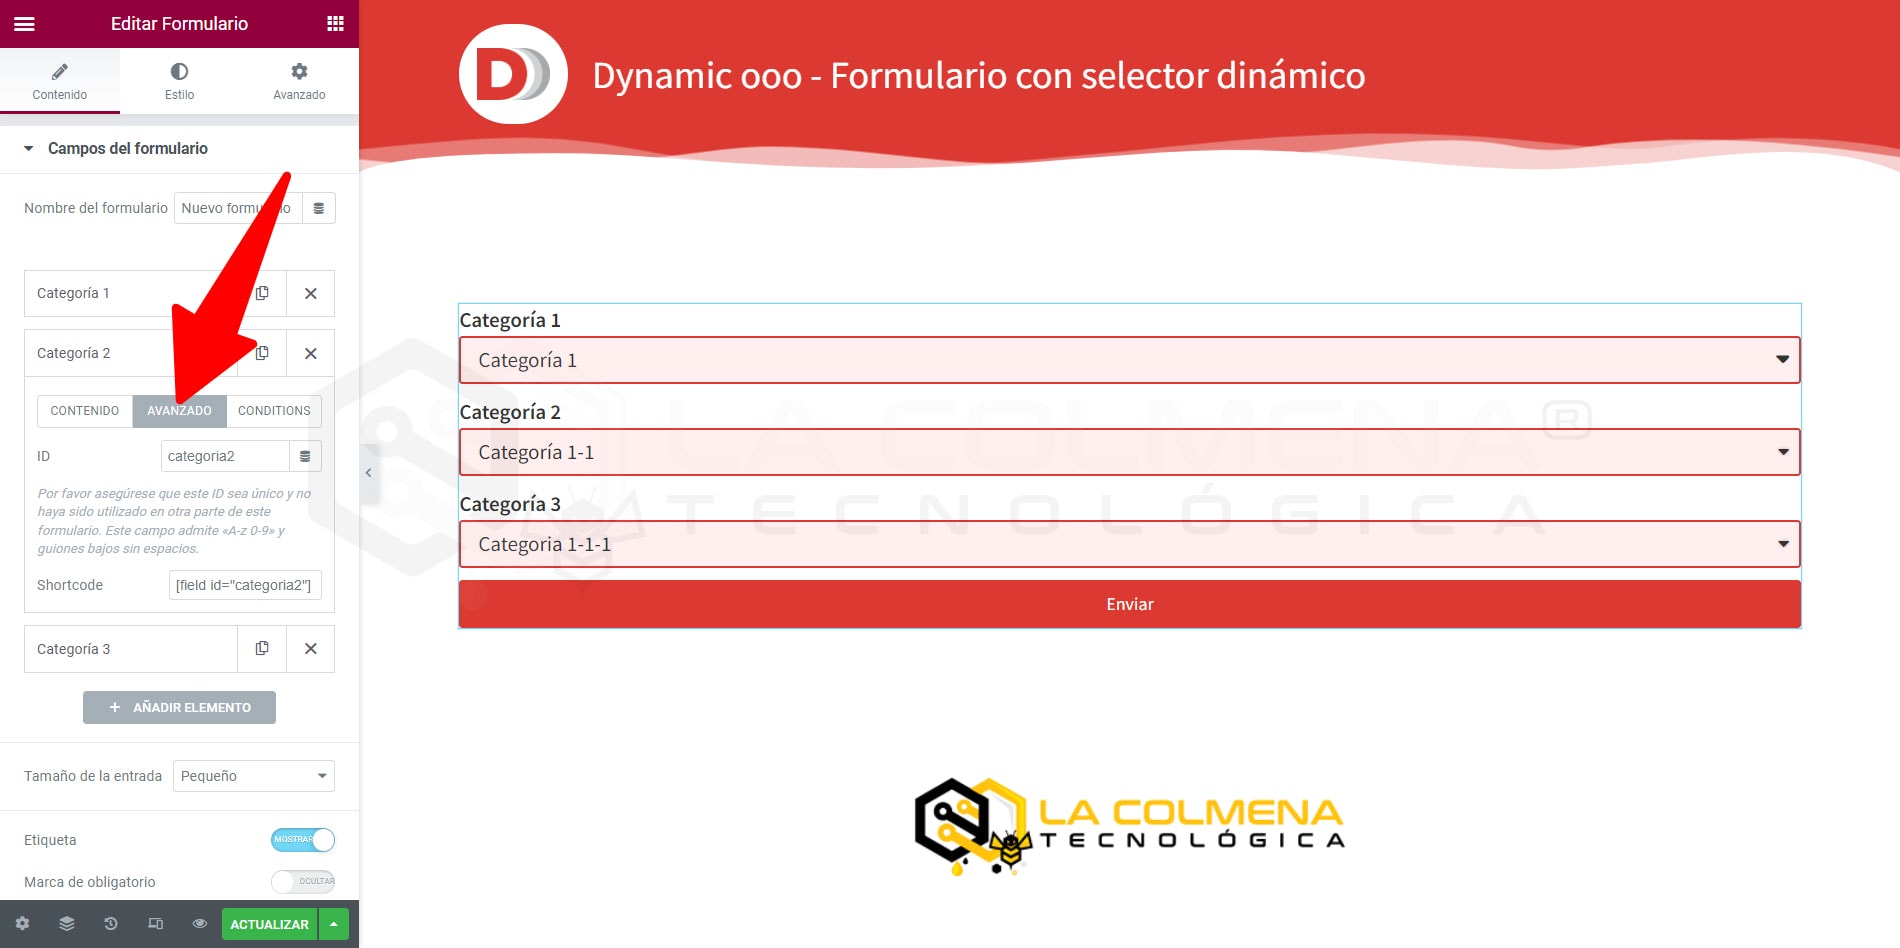 Form with dynamic selector that changes according to the value of another field with dynamic ooo